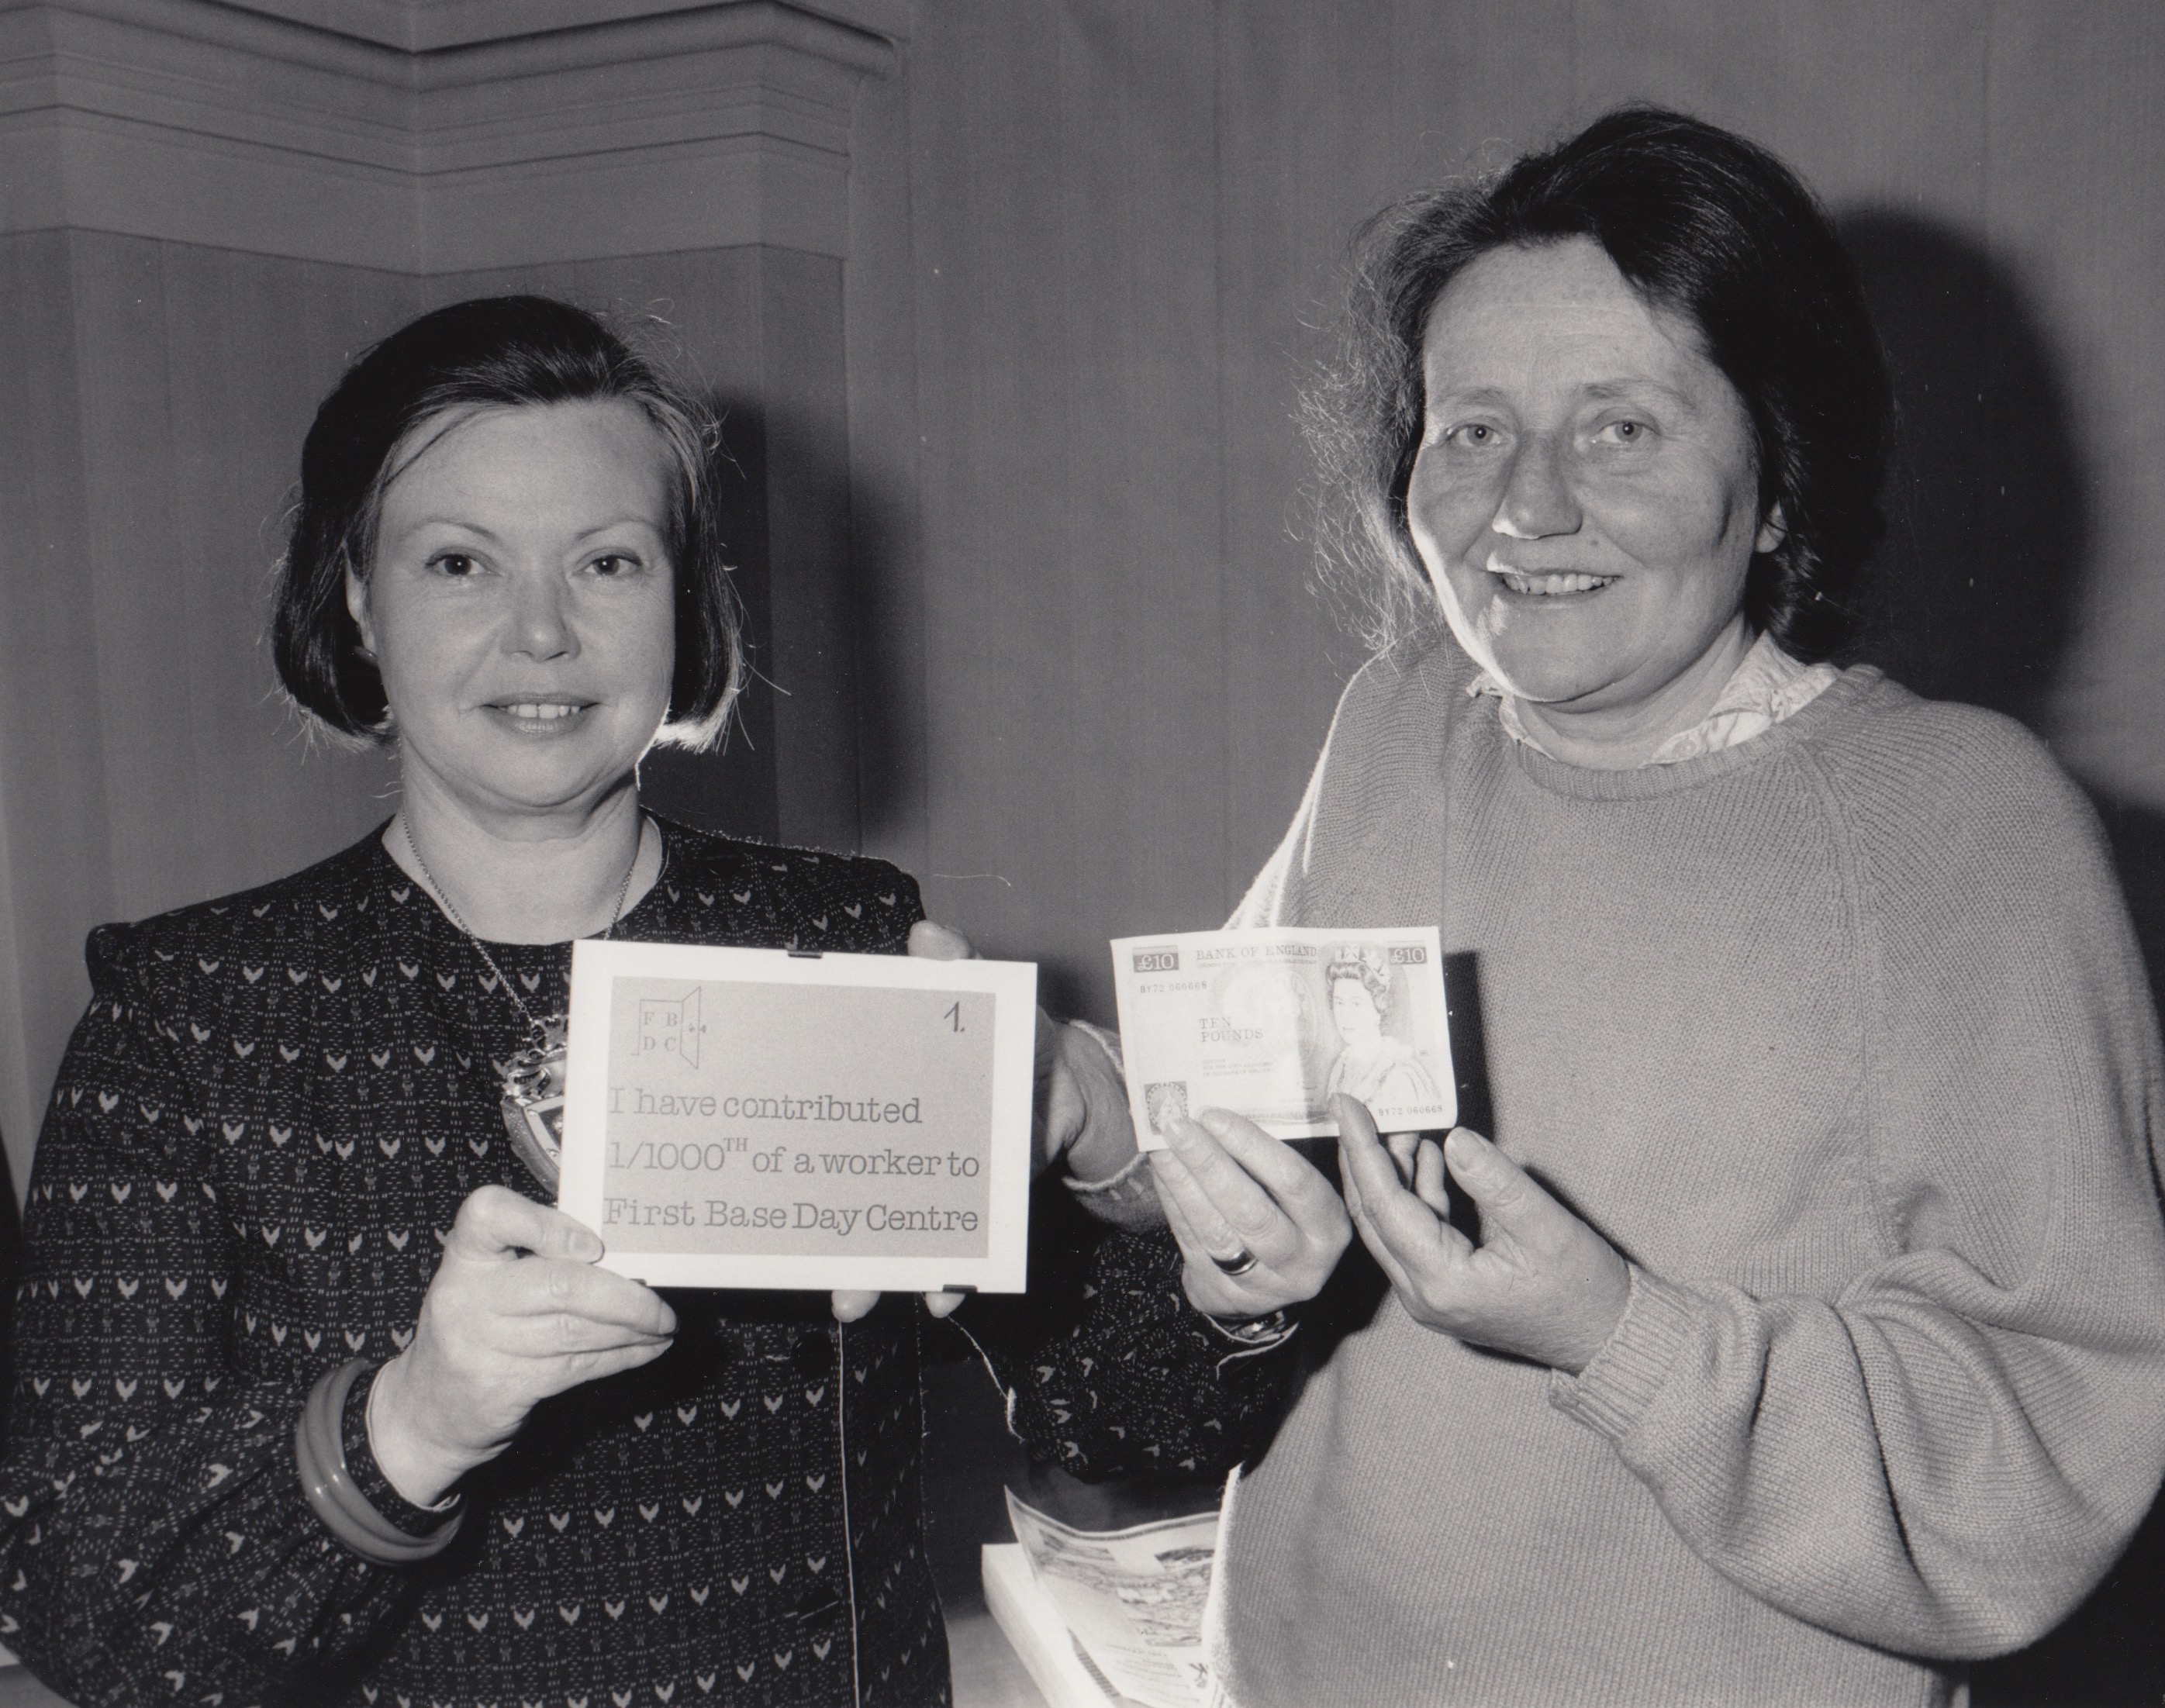 Former Mayor, Jacqui Lythell and former BHT Director Jenny Backwell, 1986